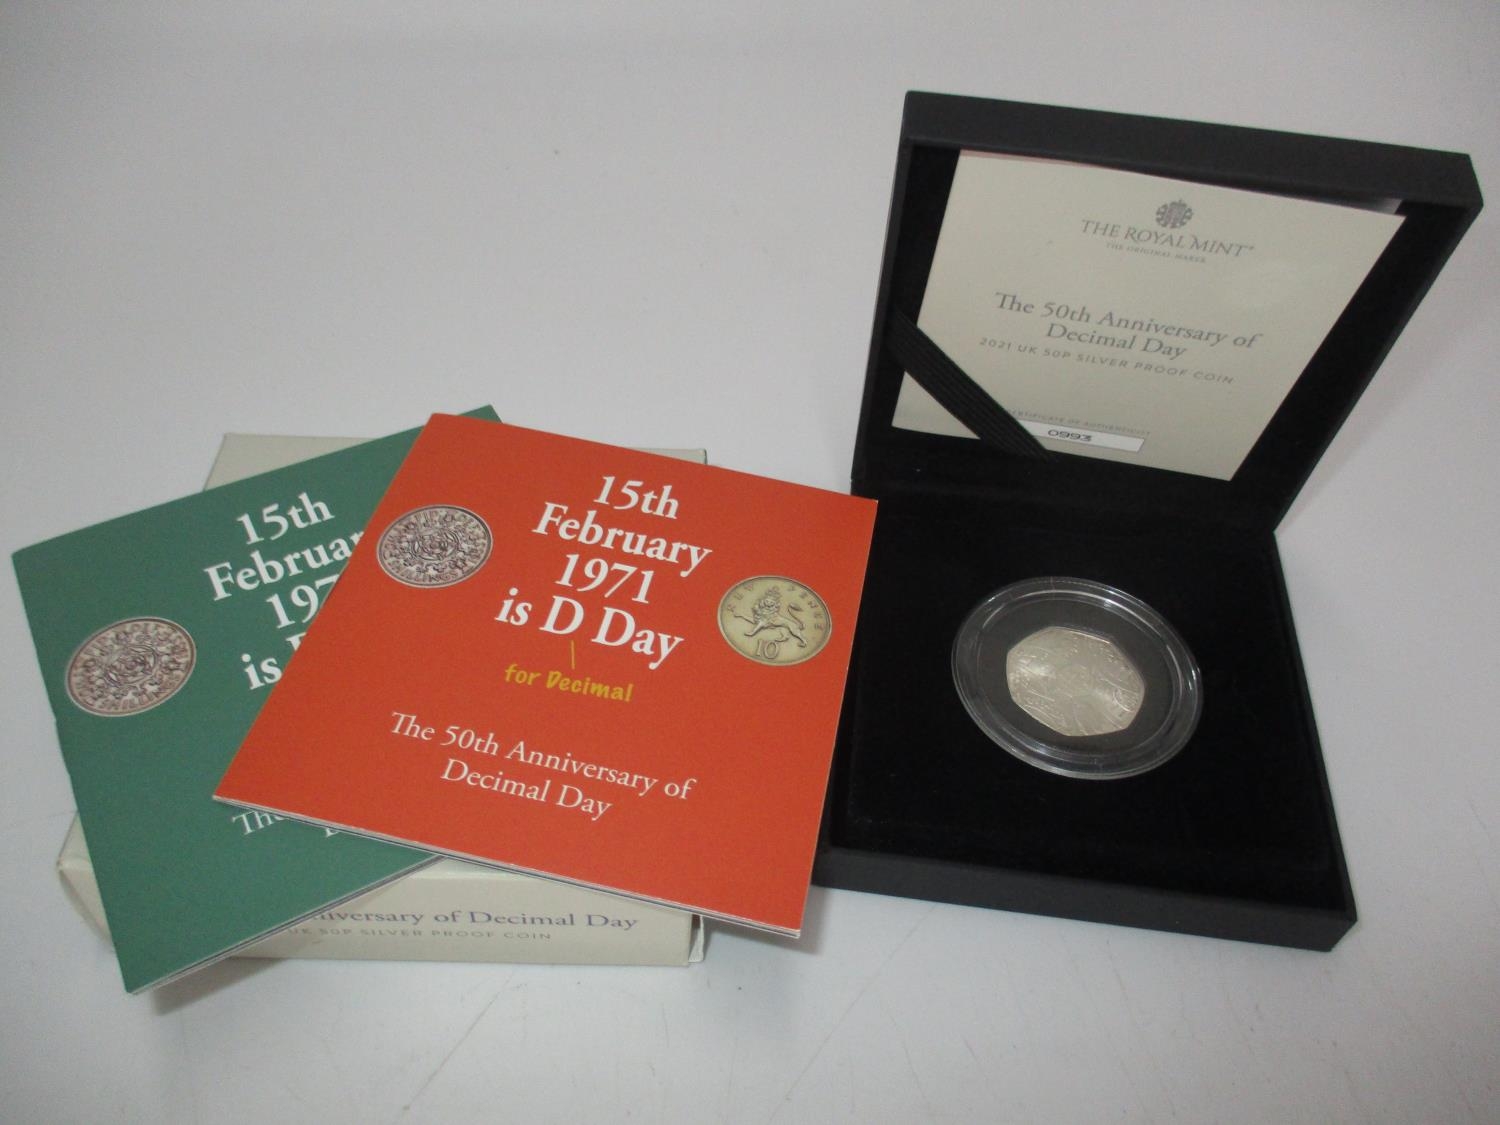 Royal Mint The 50th Anniversary of Decimal Day 2021 UK 50p Silver Proof Coin No. 0993